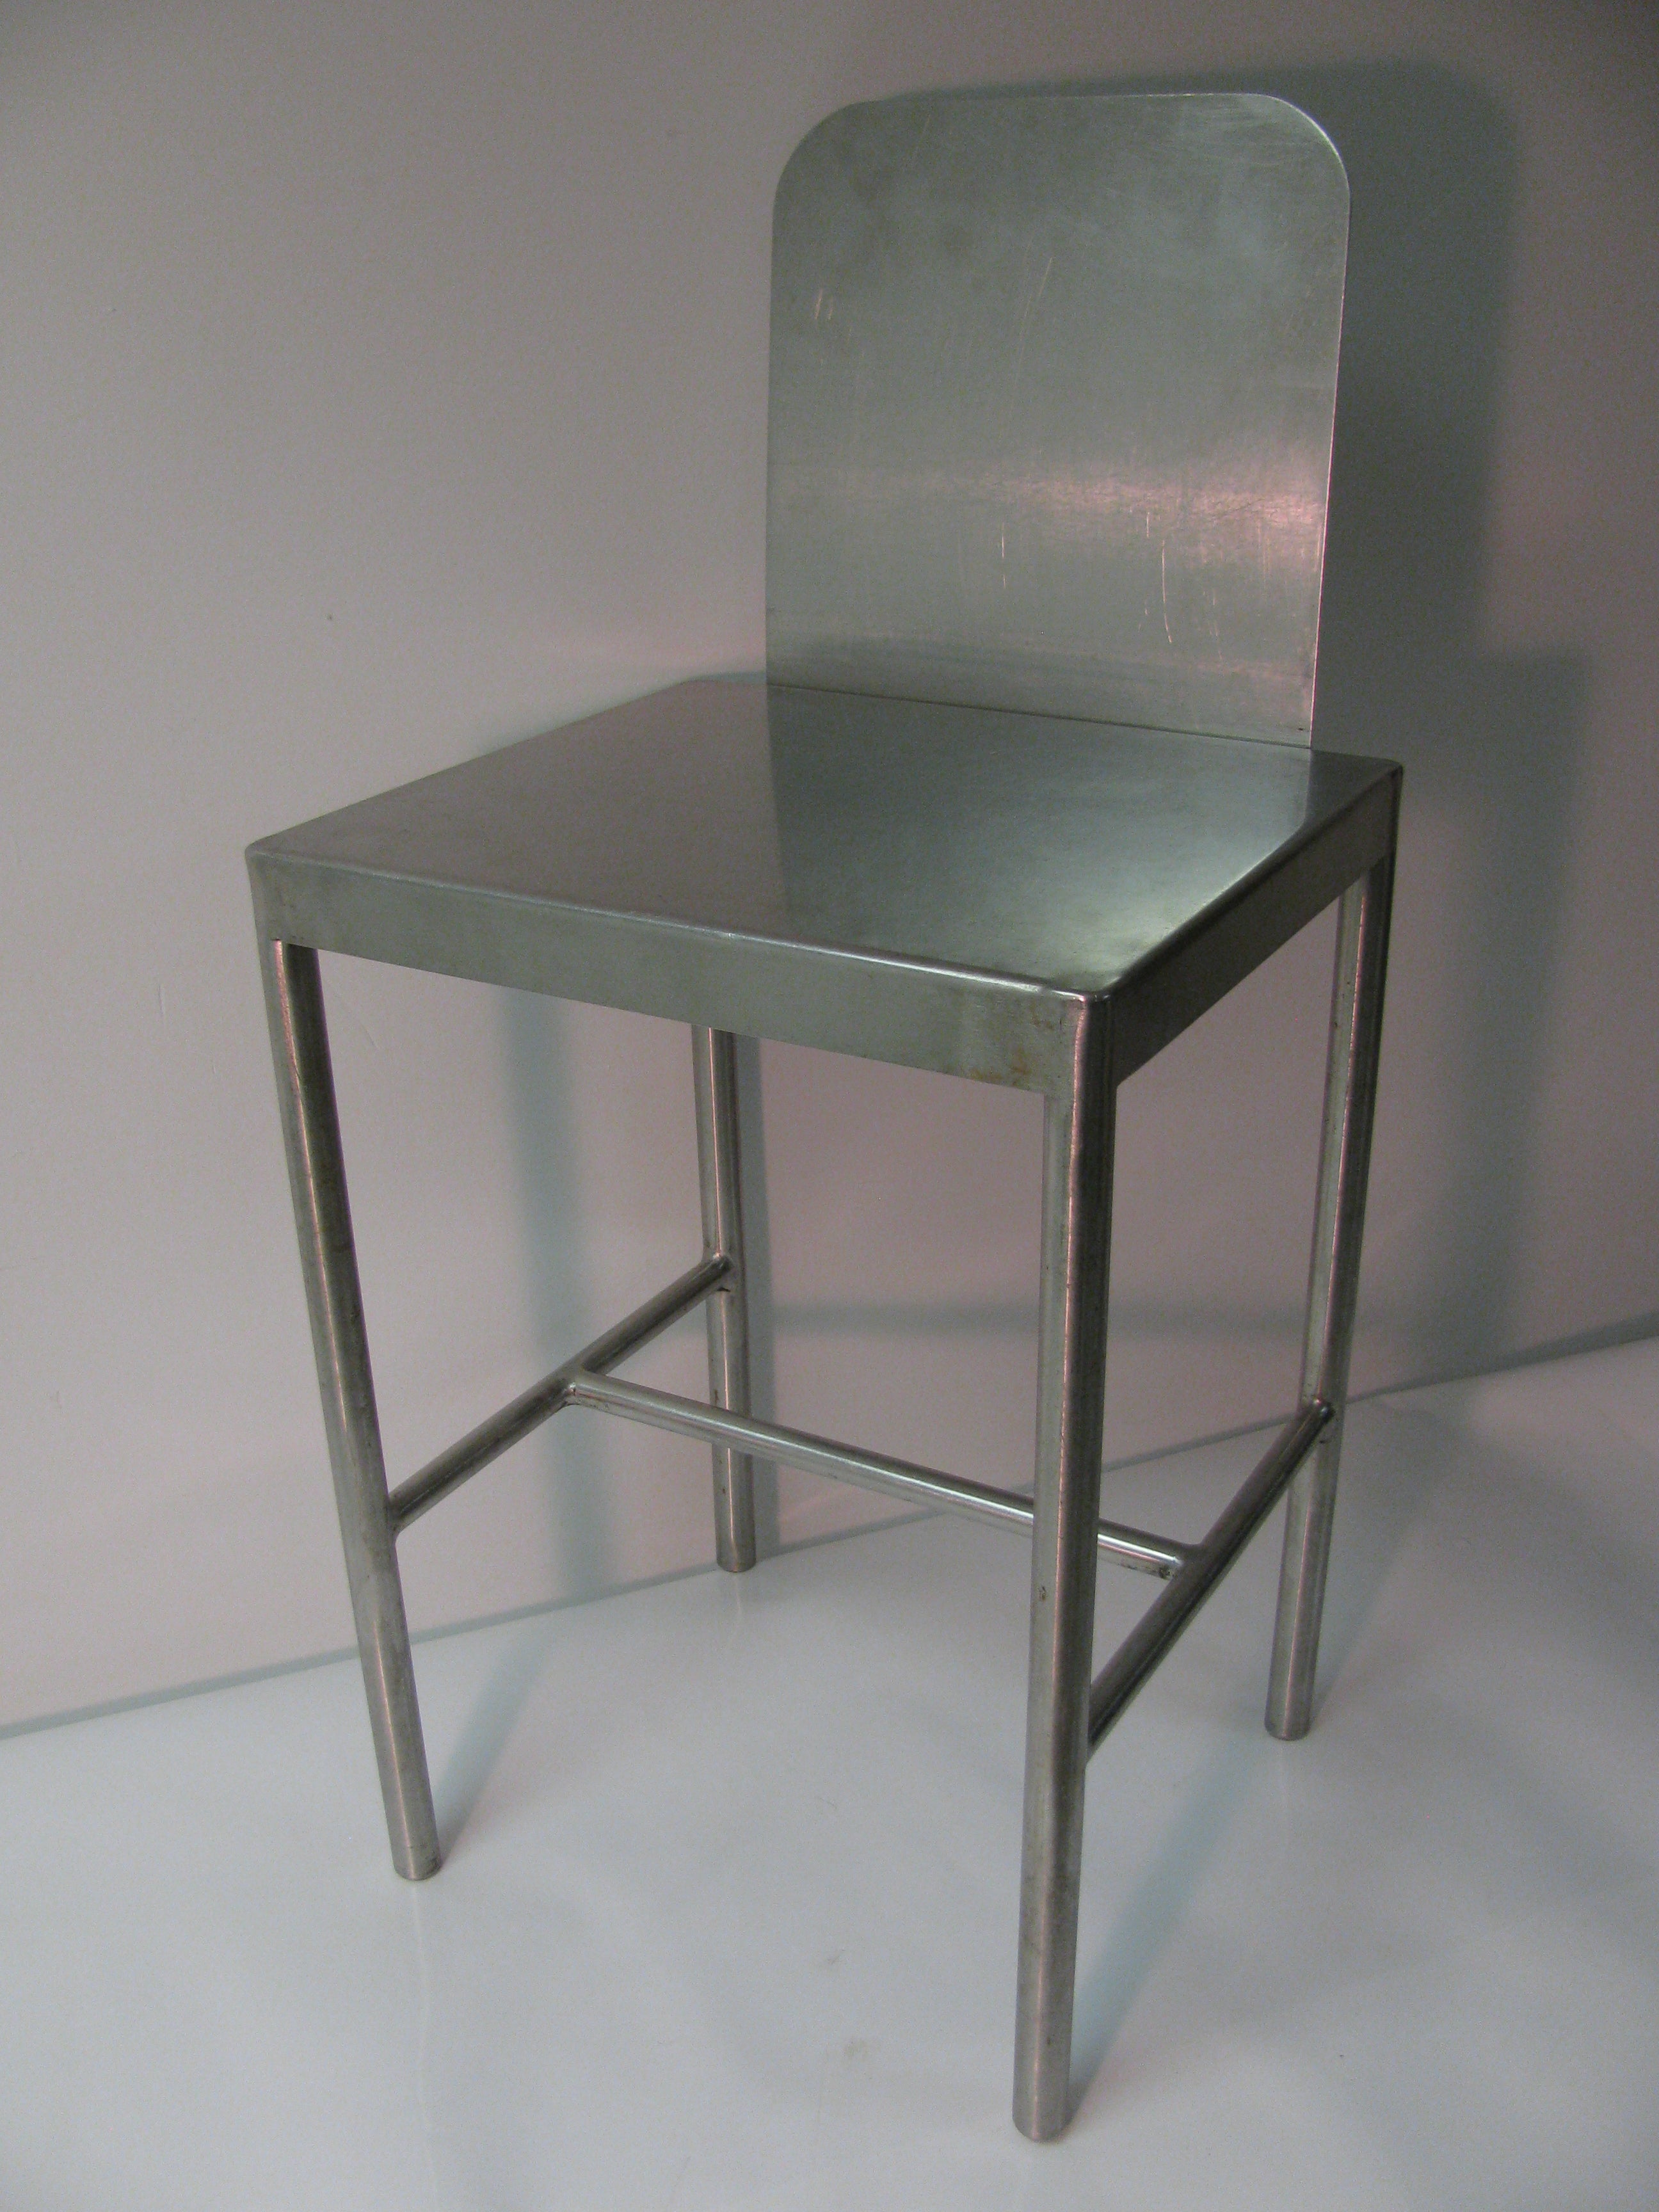 Modernism in stainless steel. Pair of stools well constructed and in like new condition.